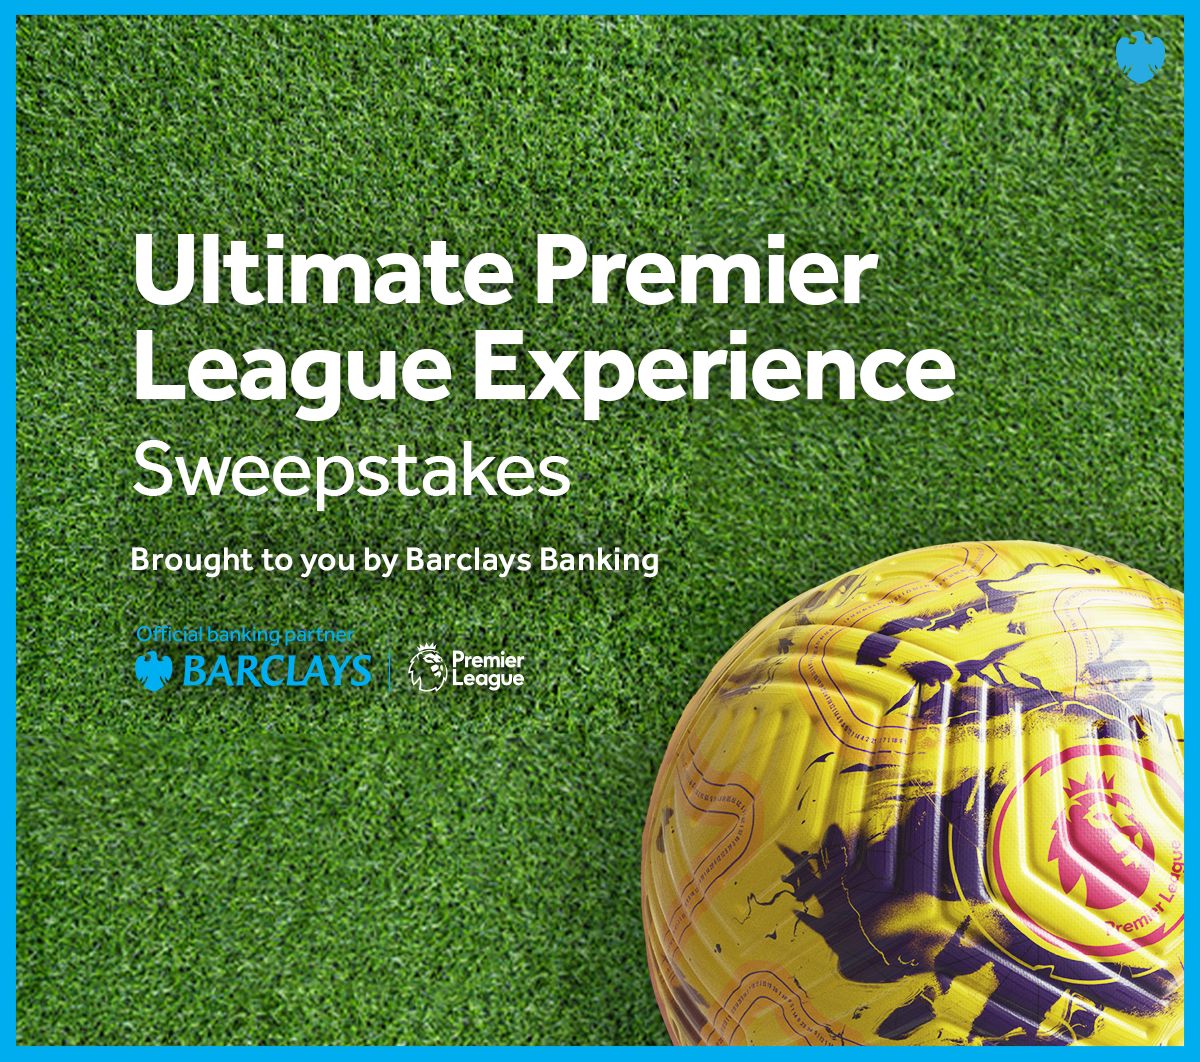 Barclays Ultimate Premier League Experience Sweepstakes